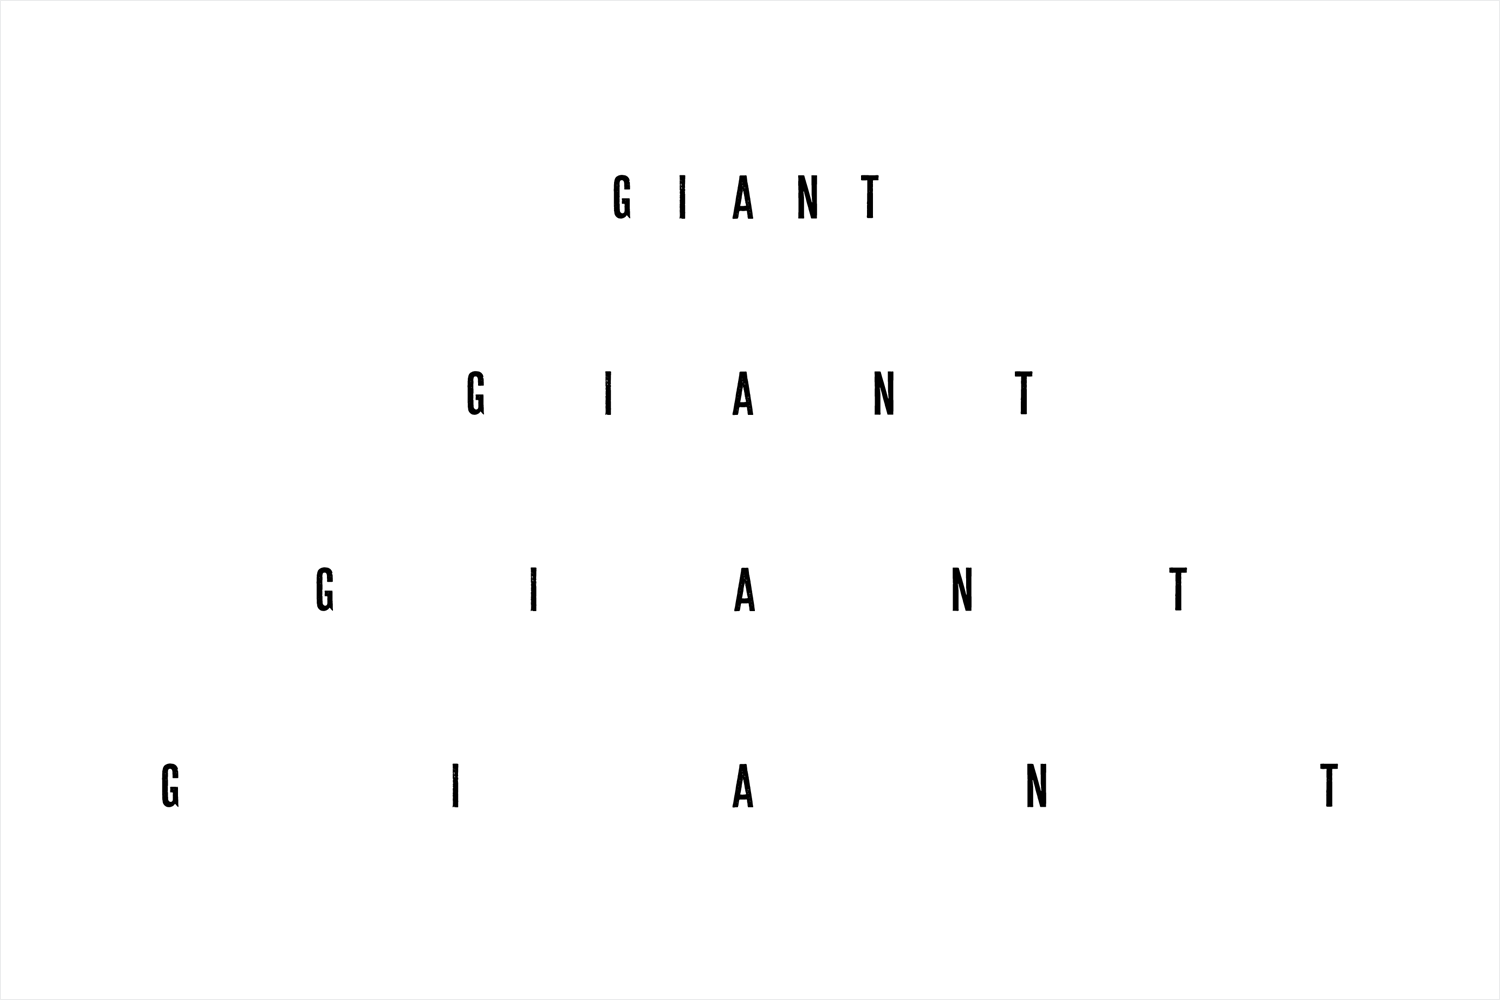 Logotype for Chicago restaurant Giant by Also Design, United States